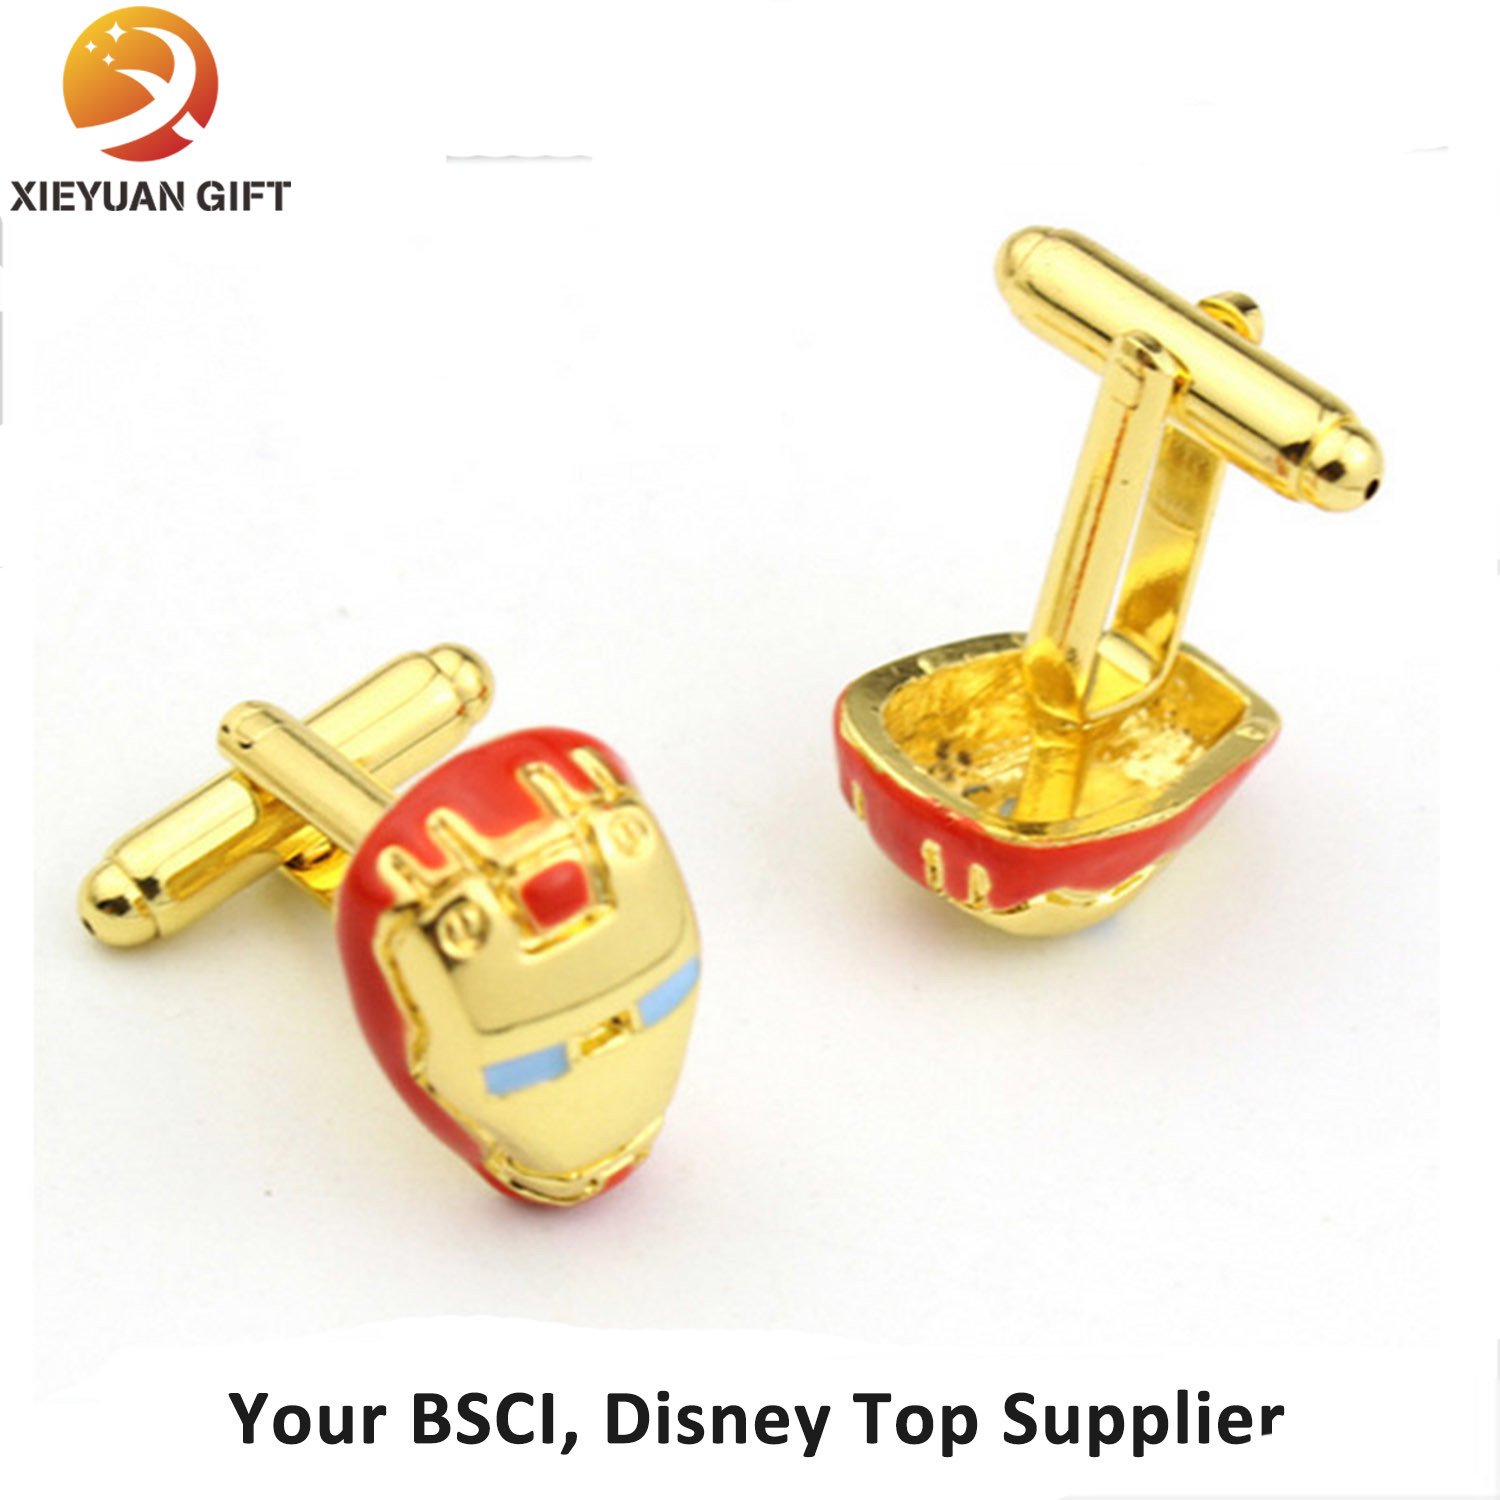 Customize Copper Gold Plating Cufflink for Gifts